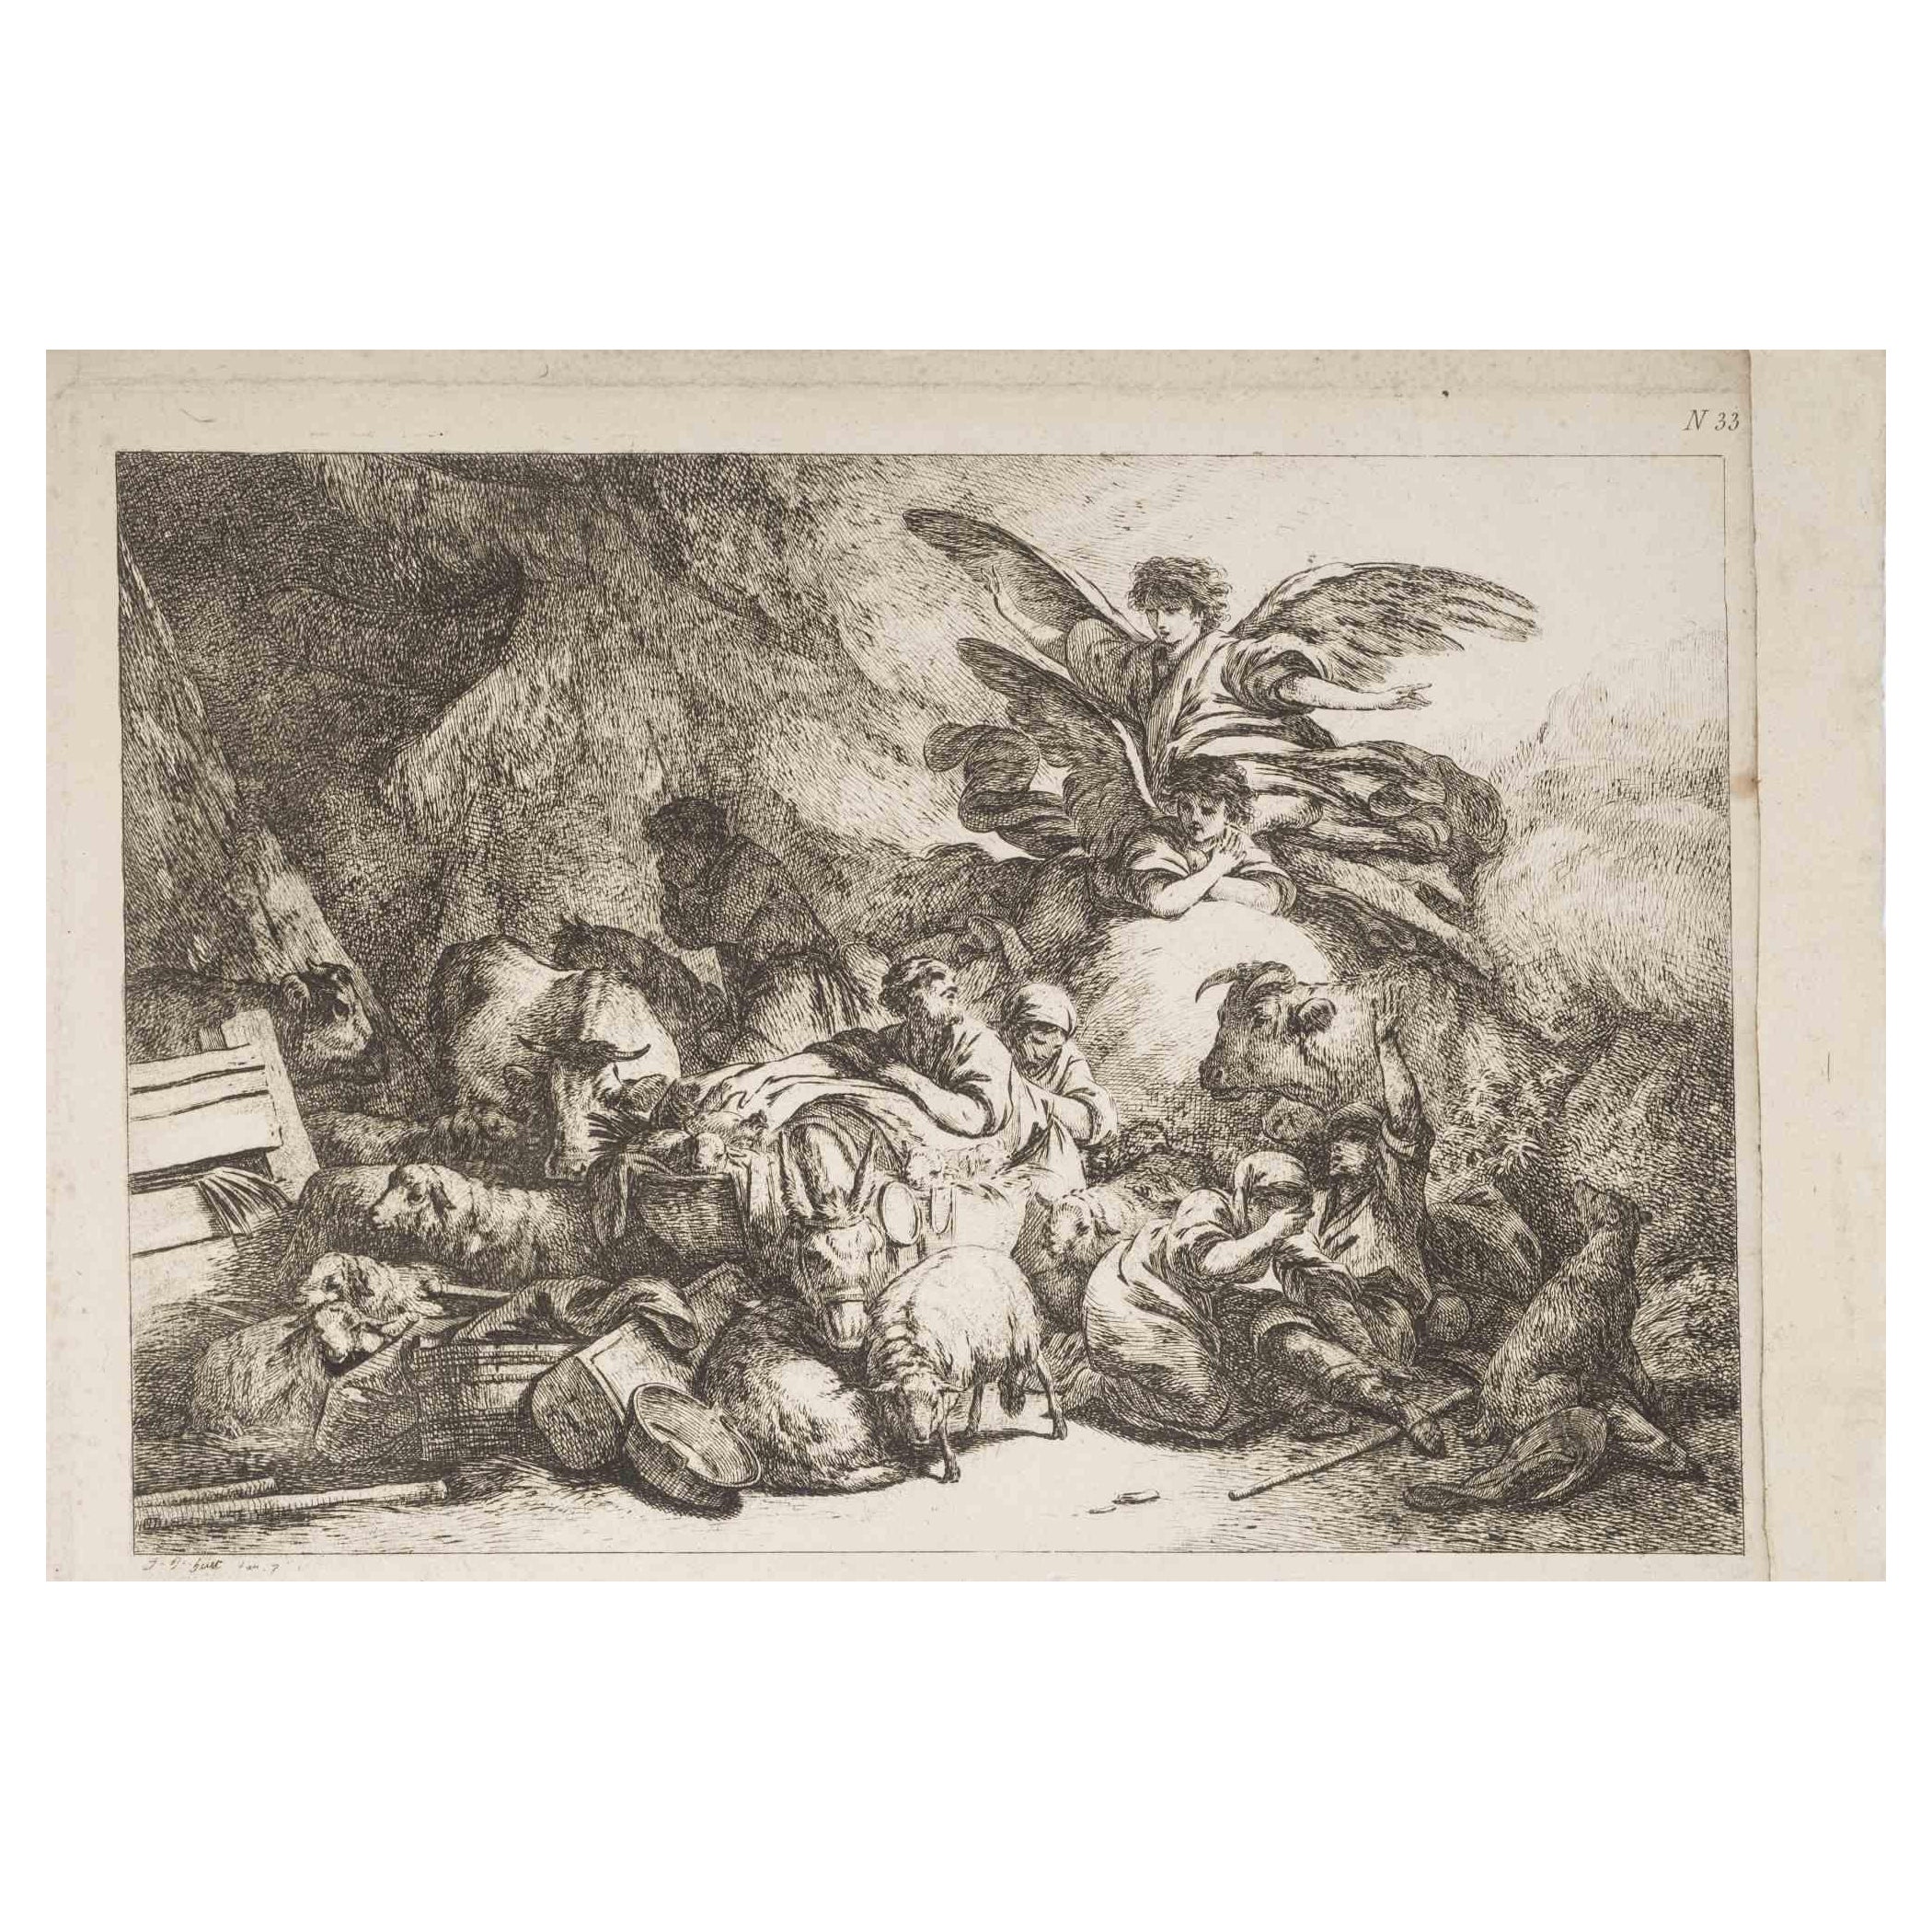 Jean Baptiste Huet Figurative Print - The Arrival of the Angels - Original Etching by J.B. Huet - 18th Century